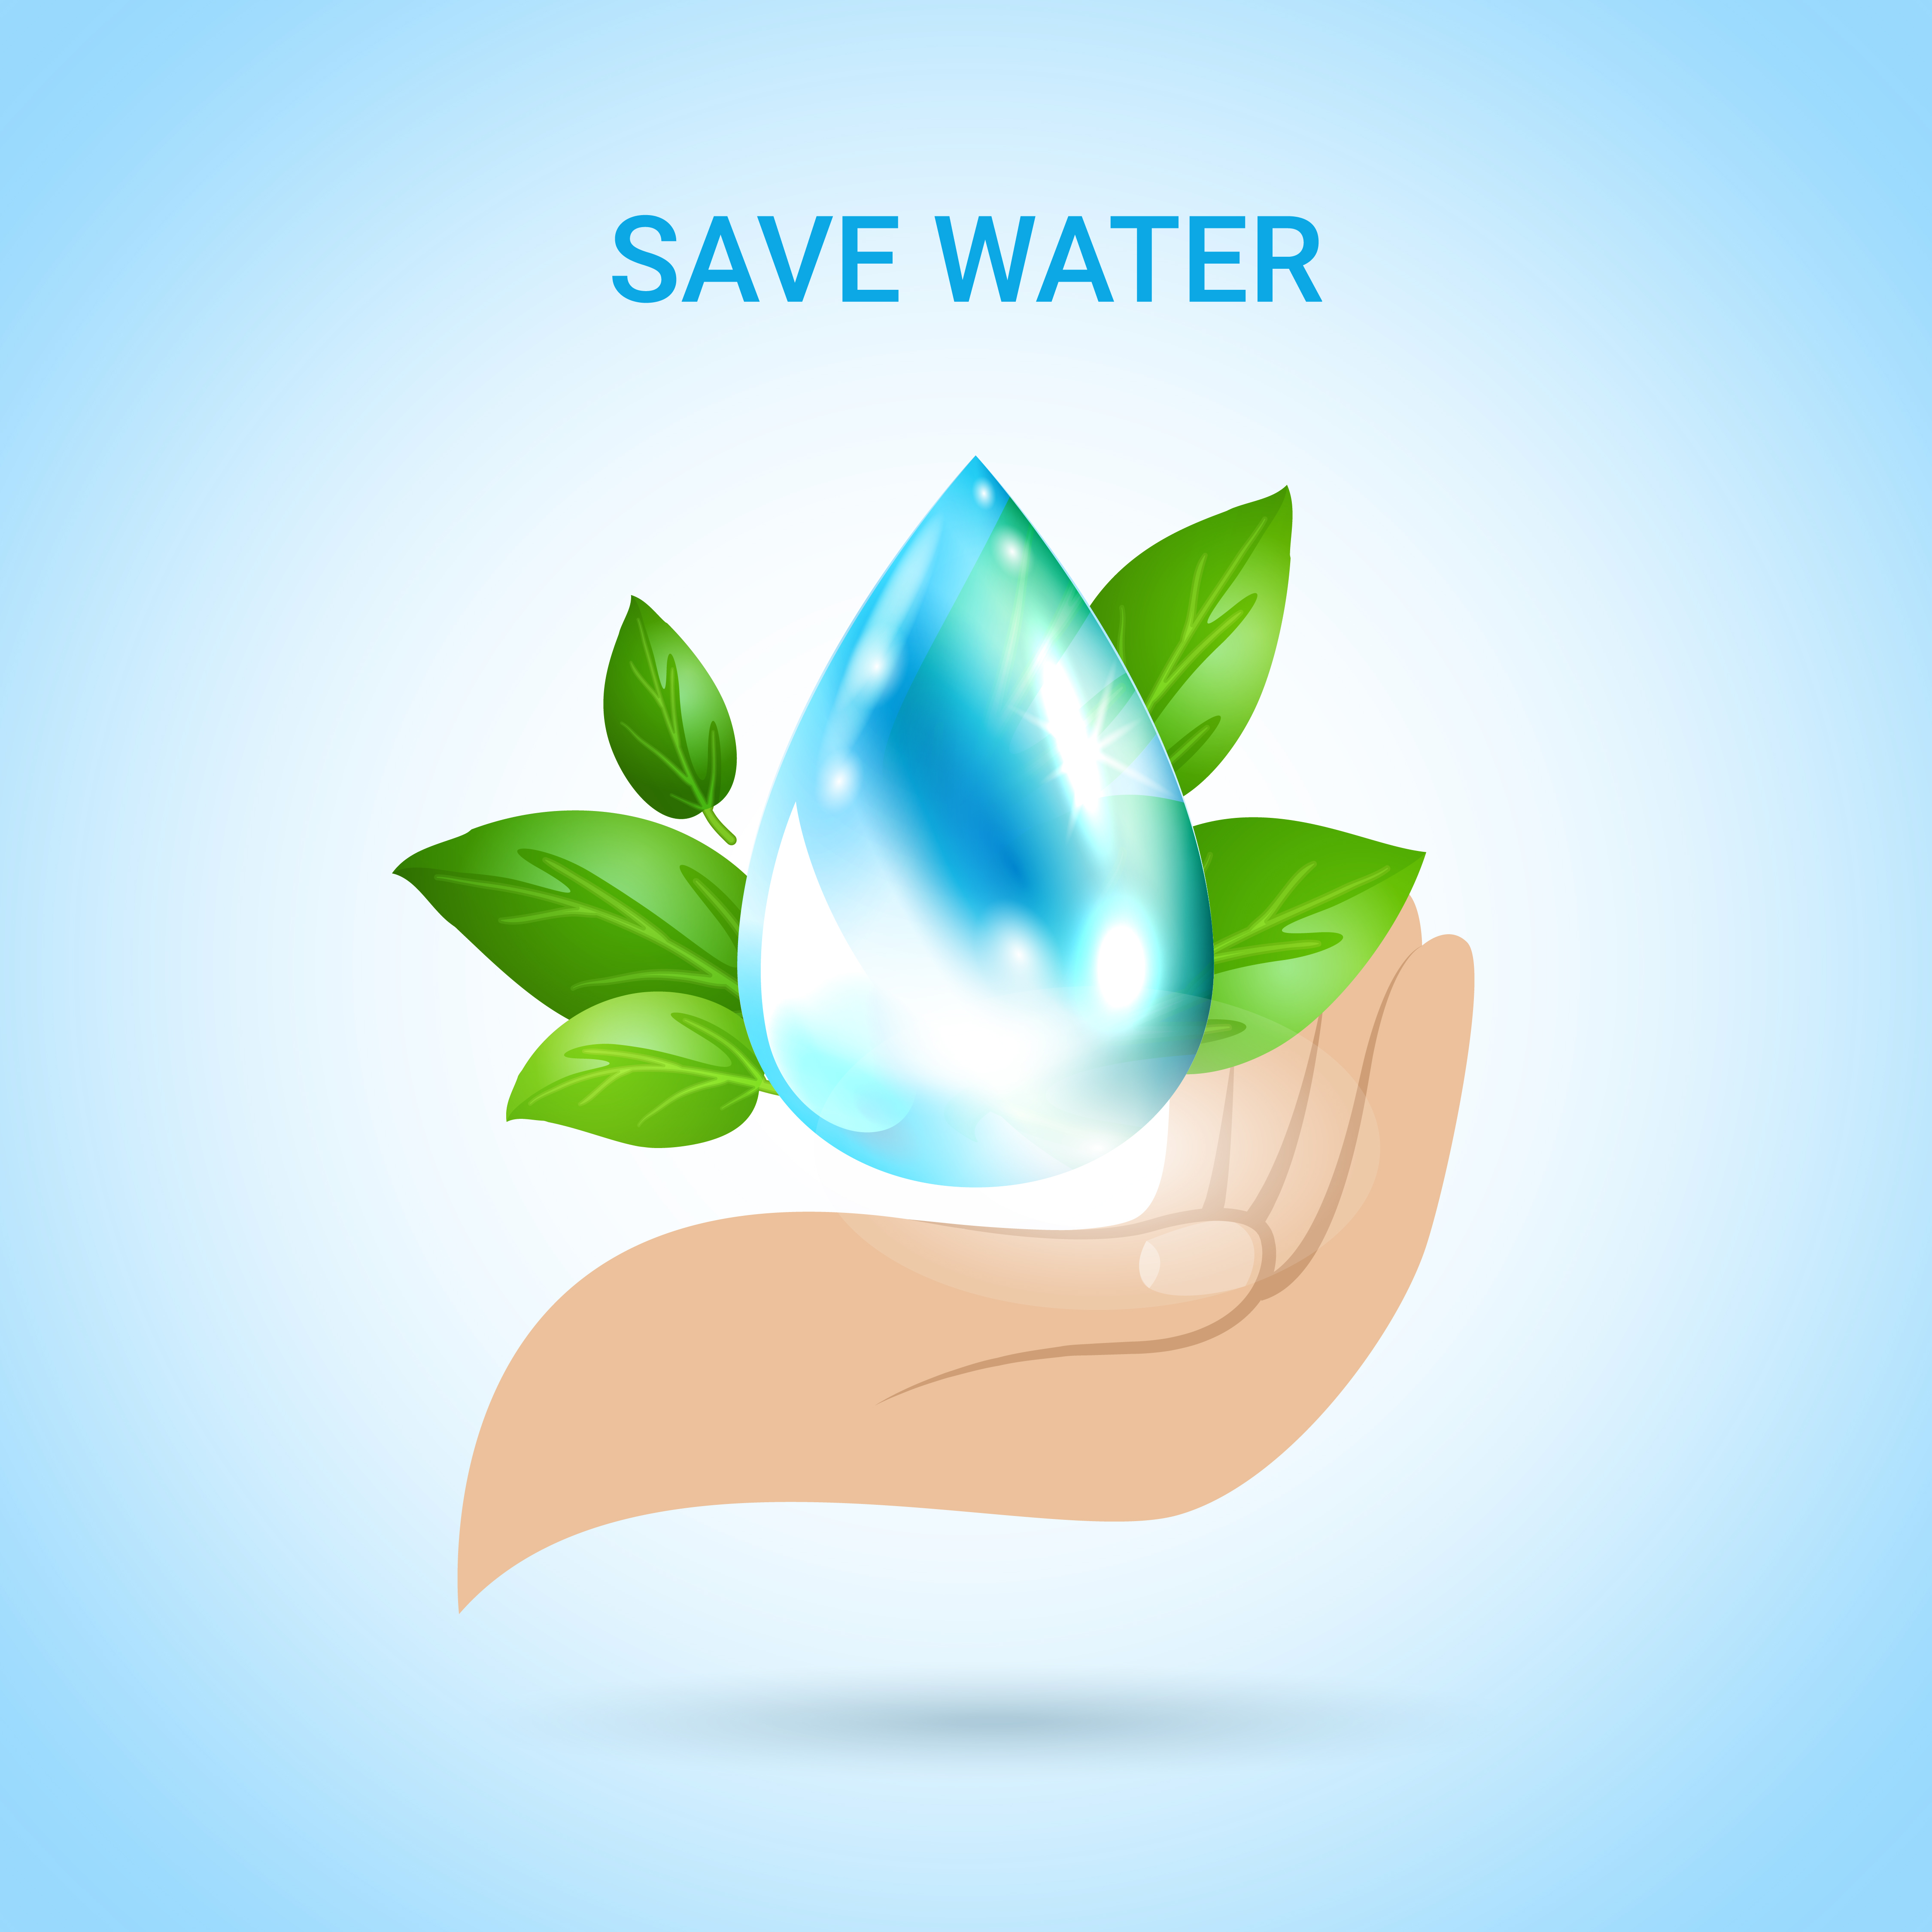 Tips to Save Water at Home